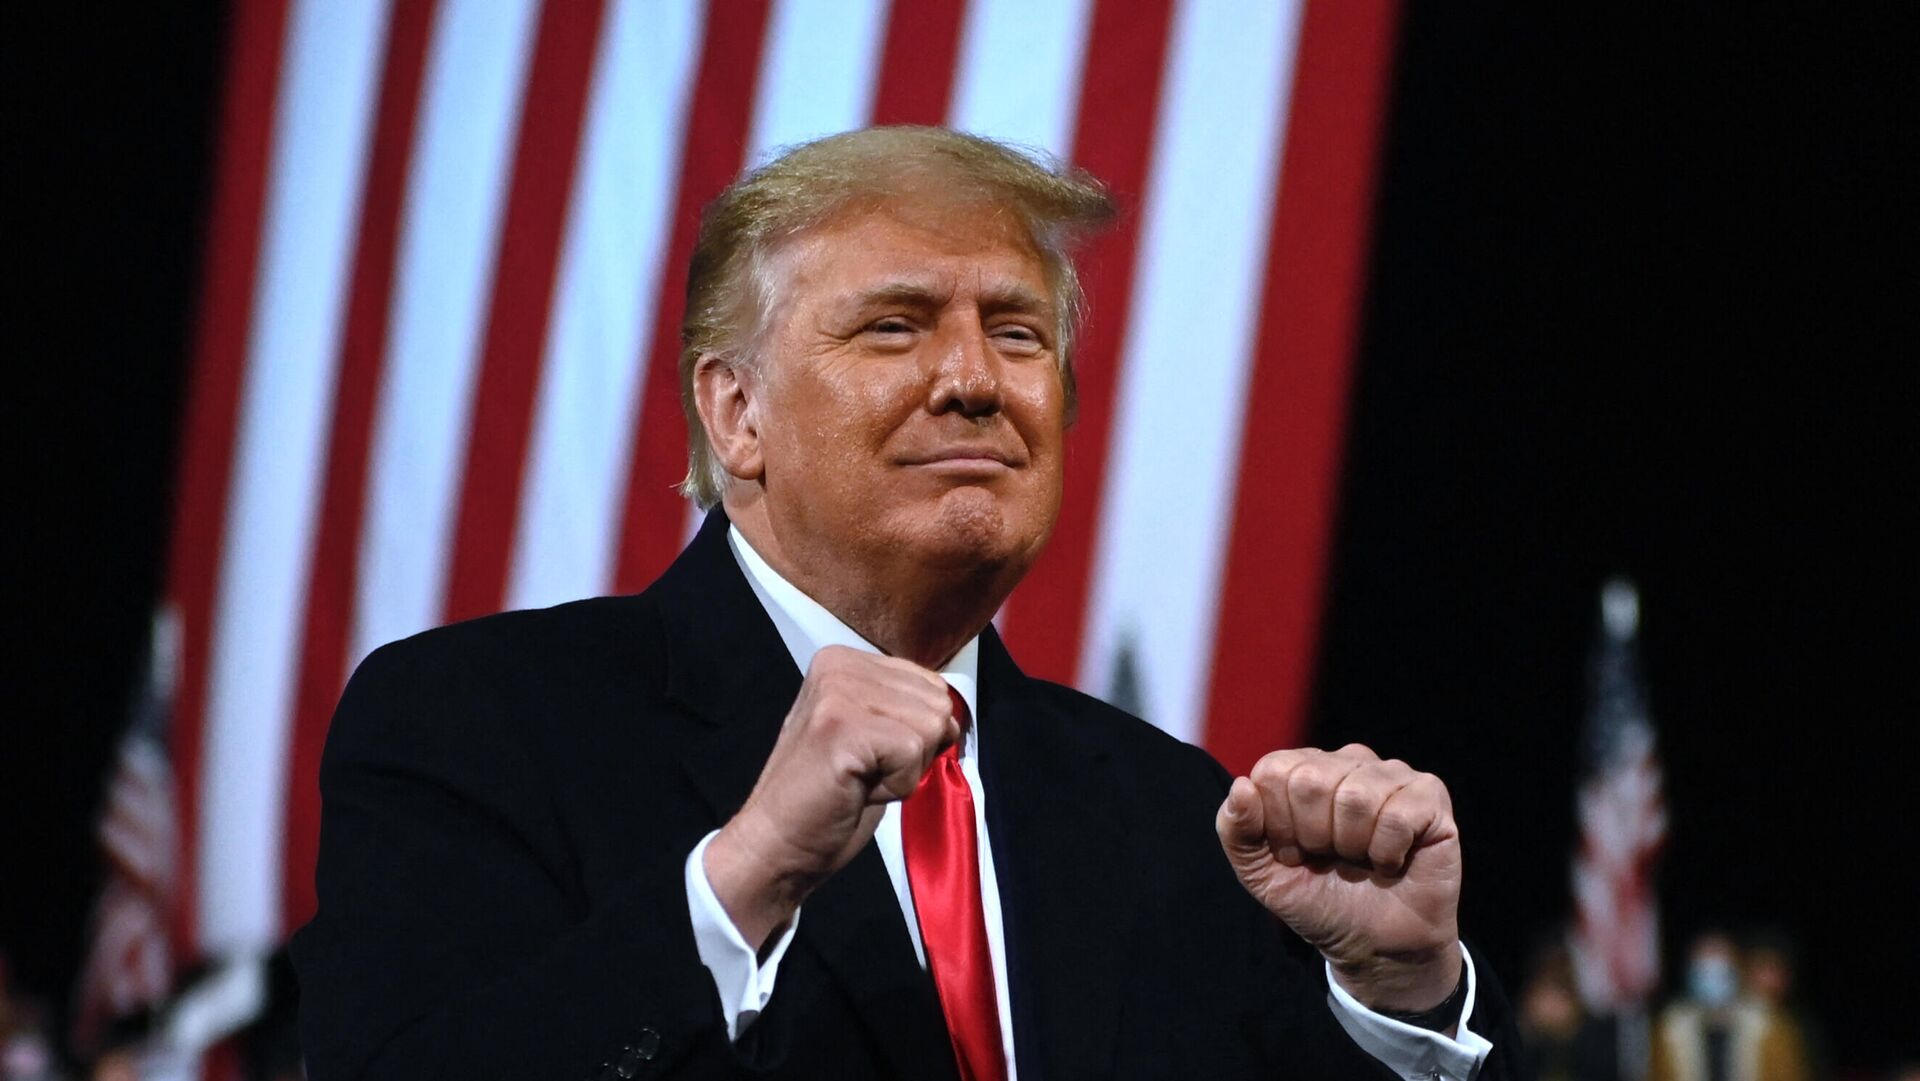 In this file photo taken on December 05, 2020 US President Donald Trump holds up his fists at the end of a rally to support Republican Senate candidates at Valdosta Regional Airport in Valdosta, Georgia. - Sputnik International, 1920, 01.10.2021